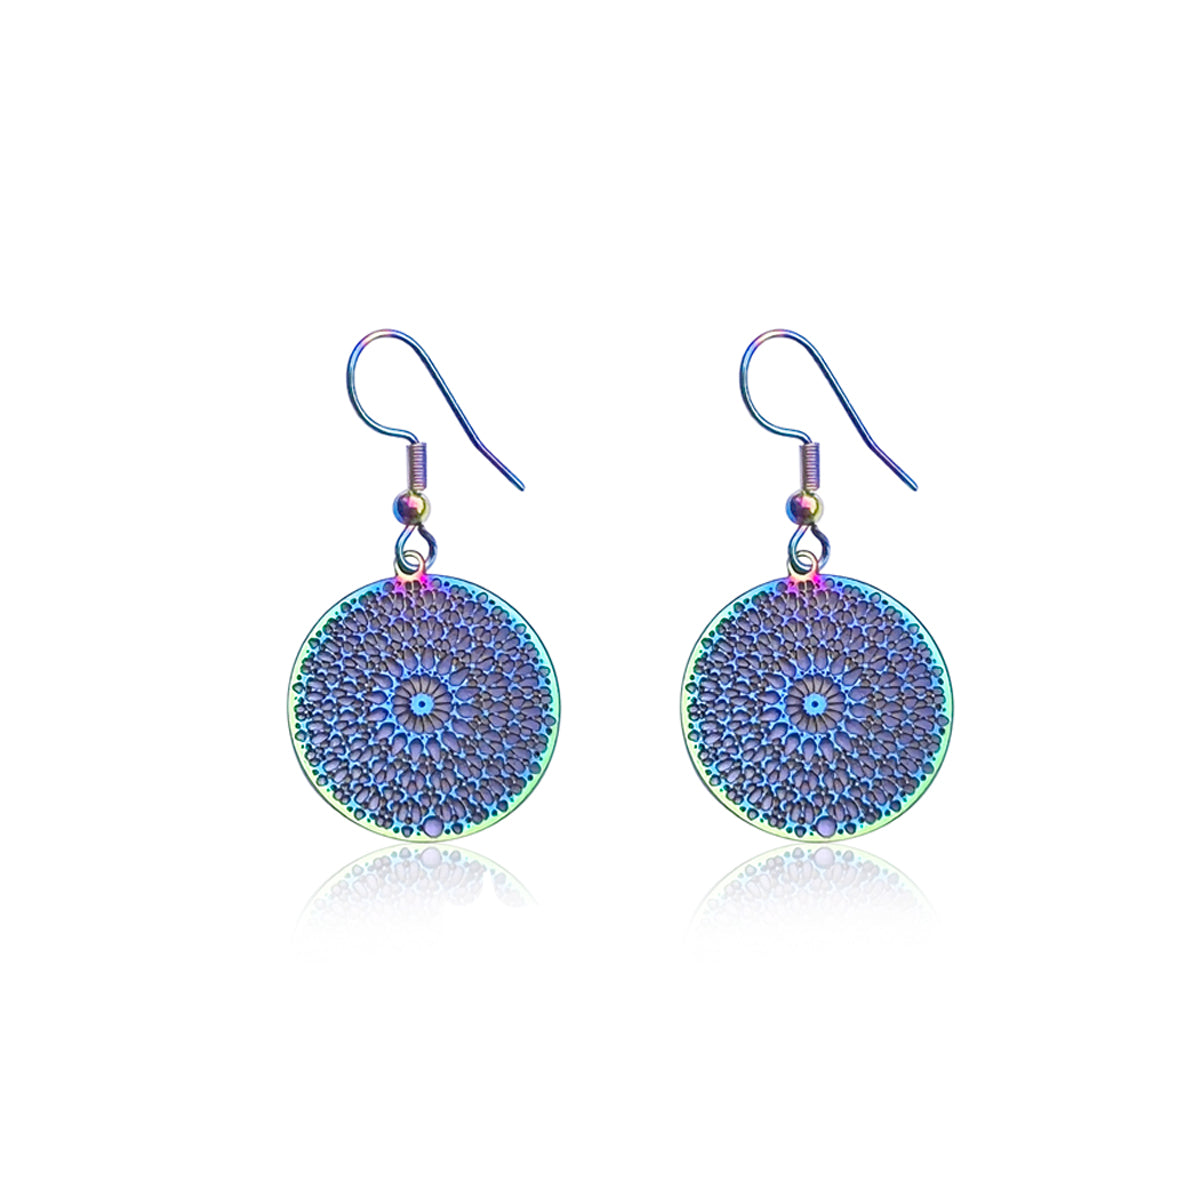 Wear the "Bohemian Bliss Mandala Earrings" to infuse your look with the vibrant colors of the rainbow and let them be a symbol of your unique, bohemian journey.